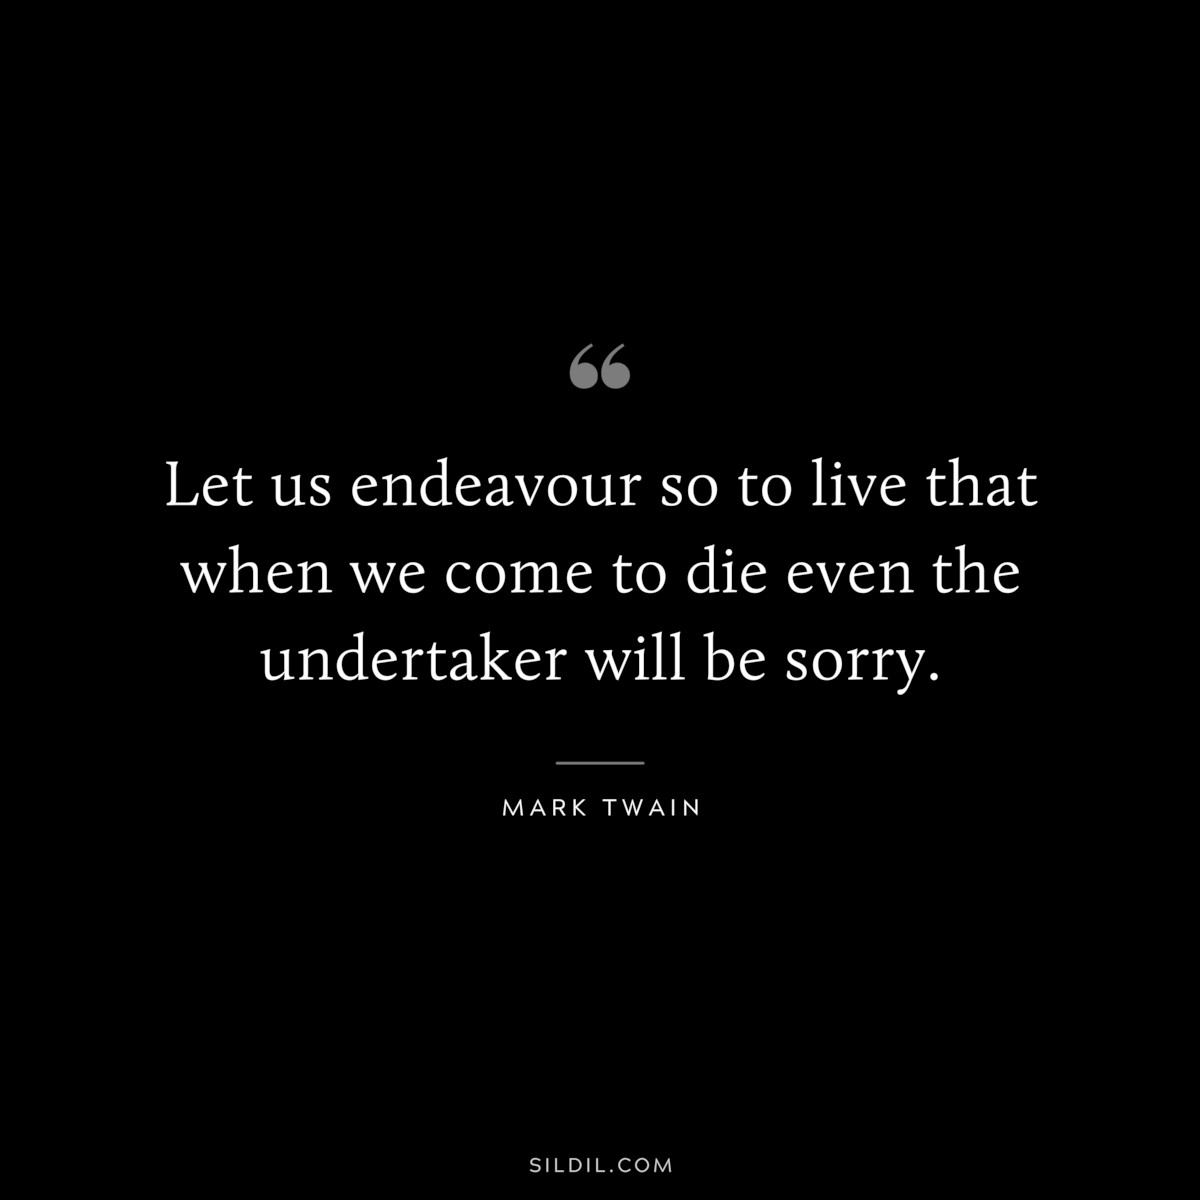 Let us endeavour so to live that when we come to die even the undertaker will be sorry. ― Mark Twain